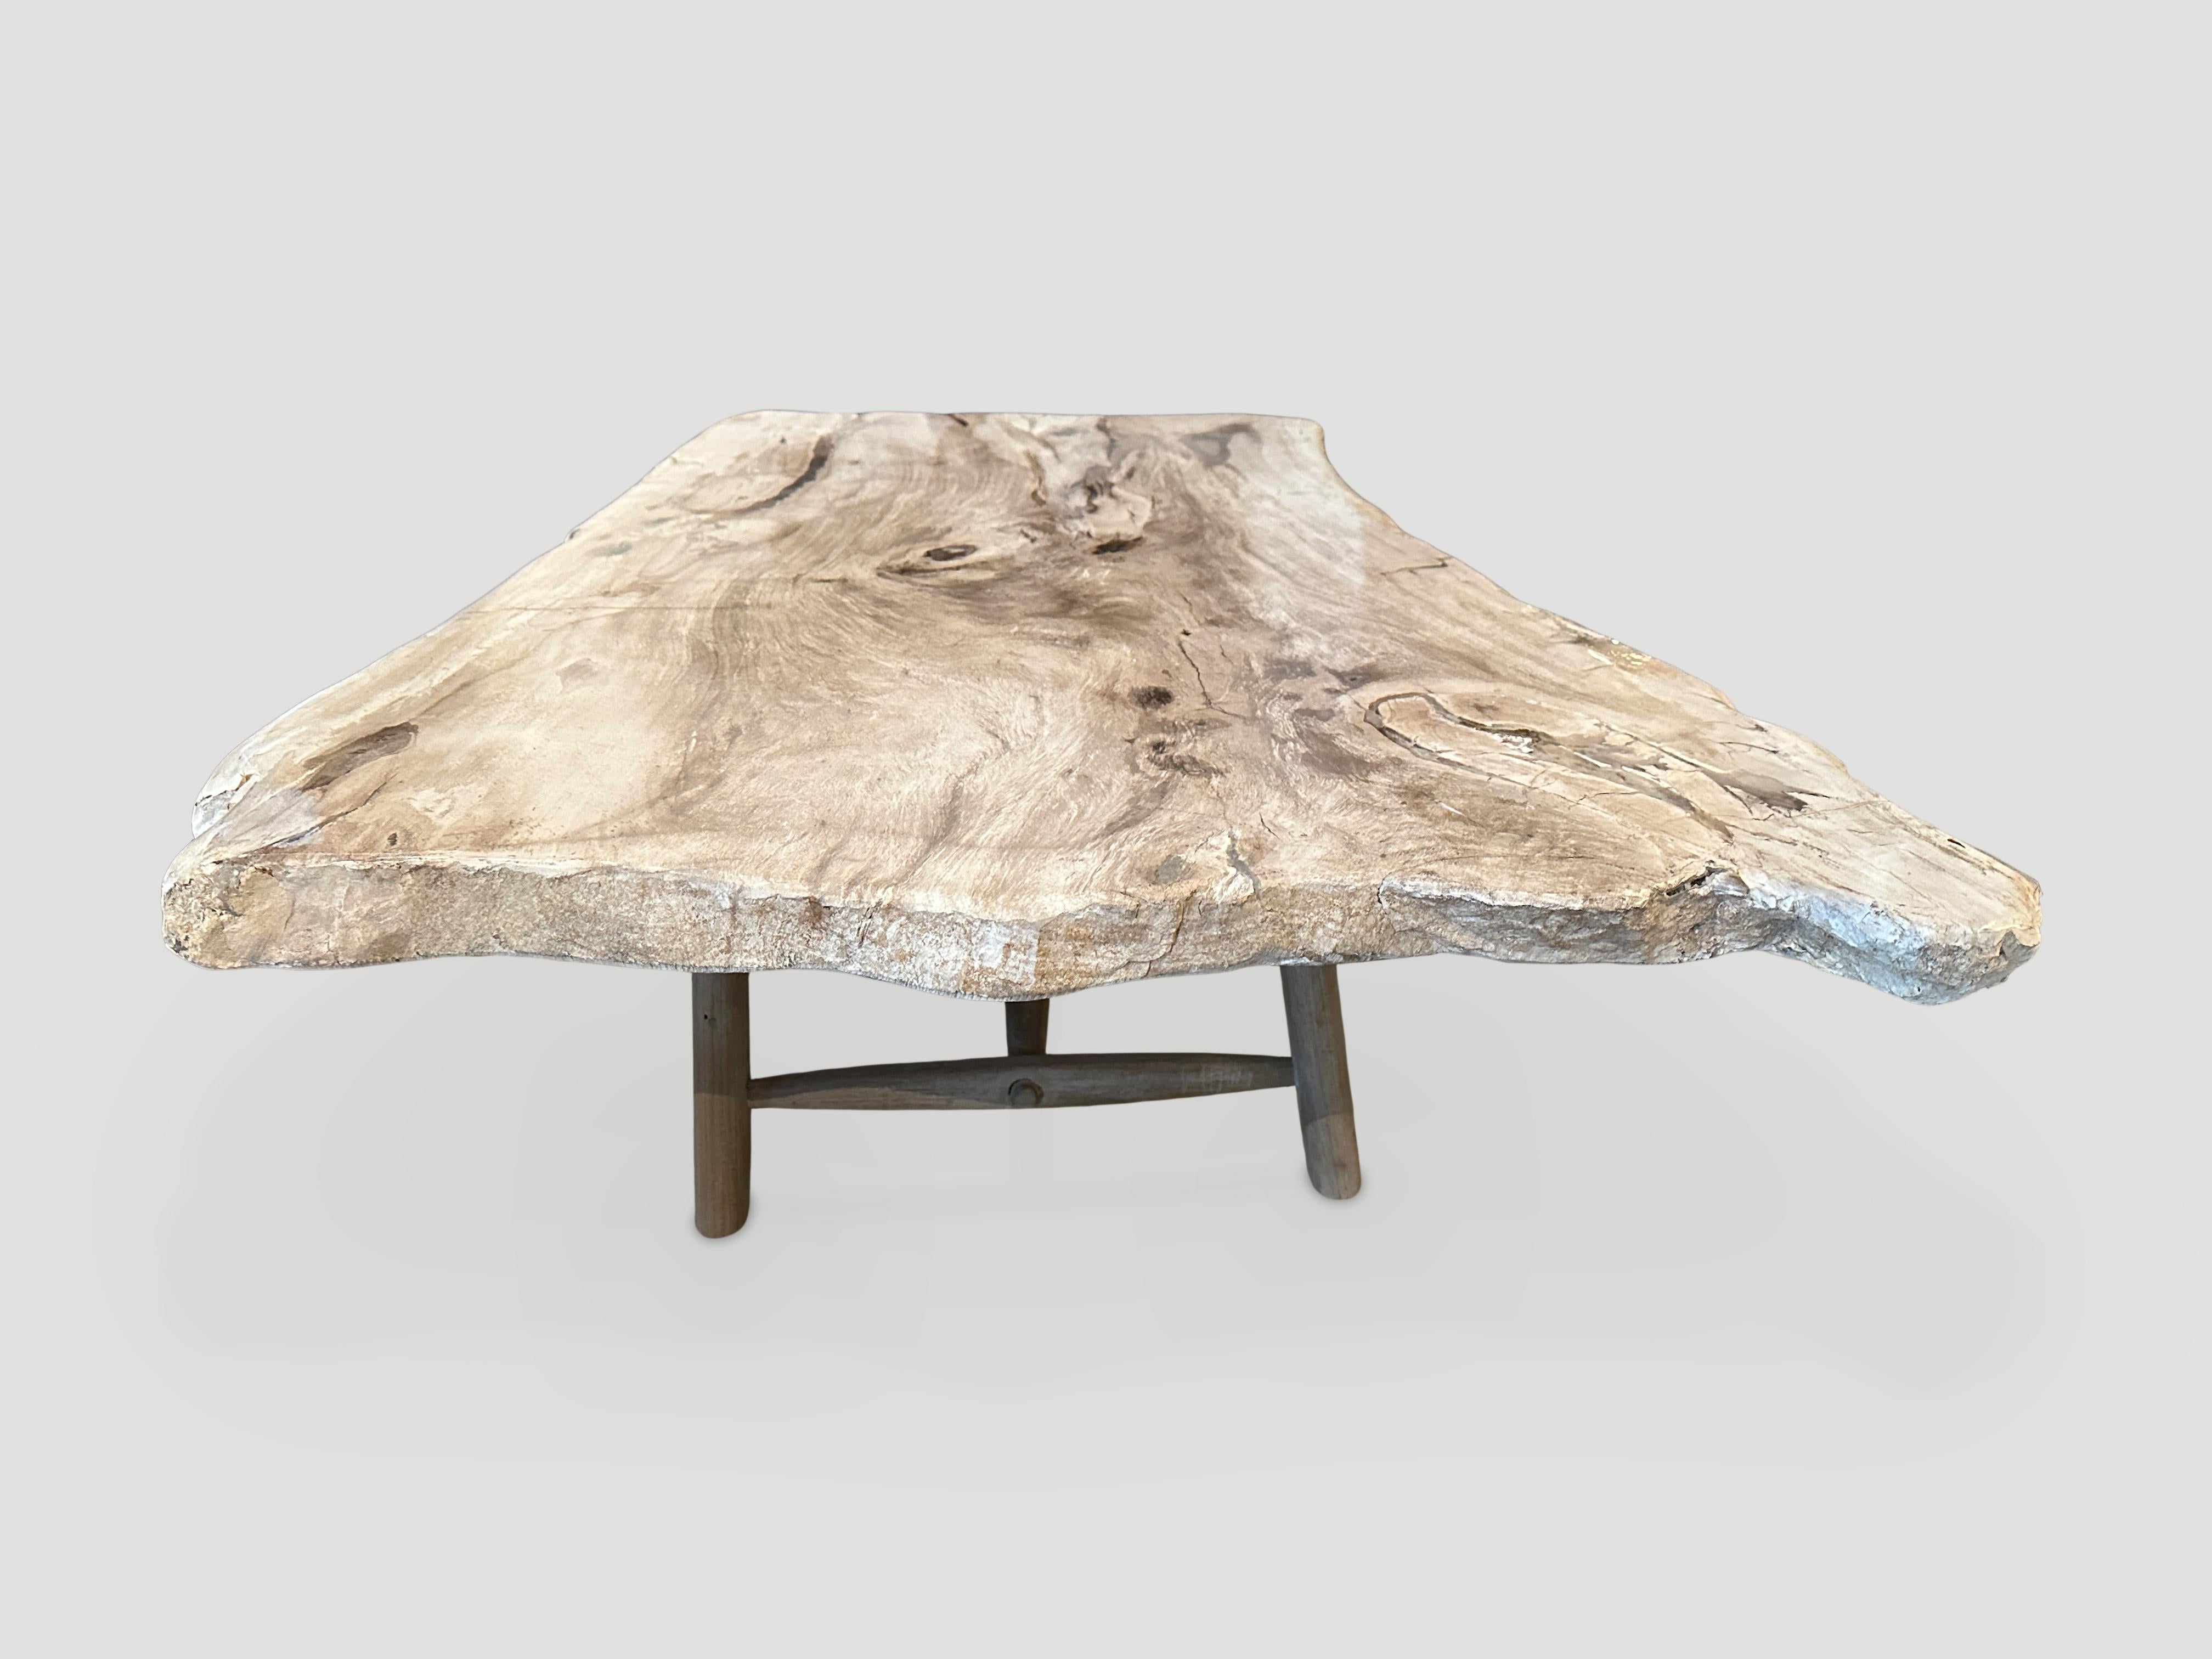 Impressive single two inch thick slab petrified wood coffee table, resting on a midcentury style teak base. These colors are the hardest to source. It’s fascinating how Mother Nature produces these stunning 40 million year old petrified teak logs